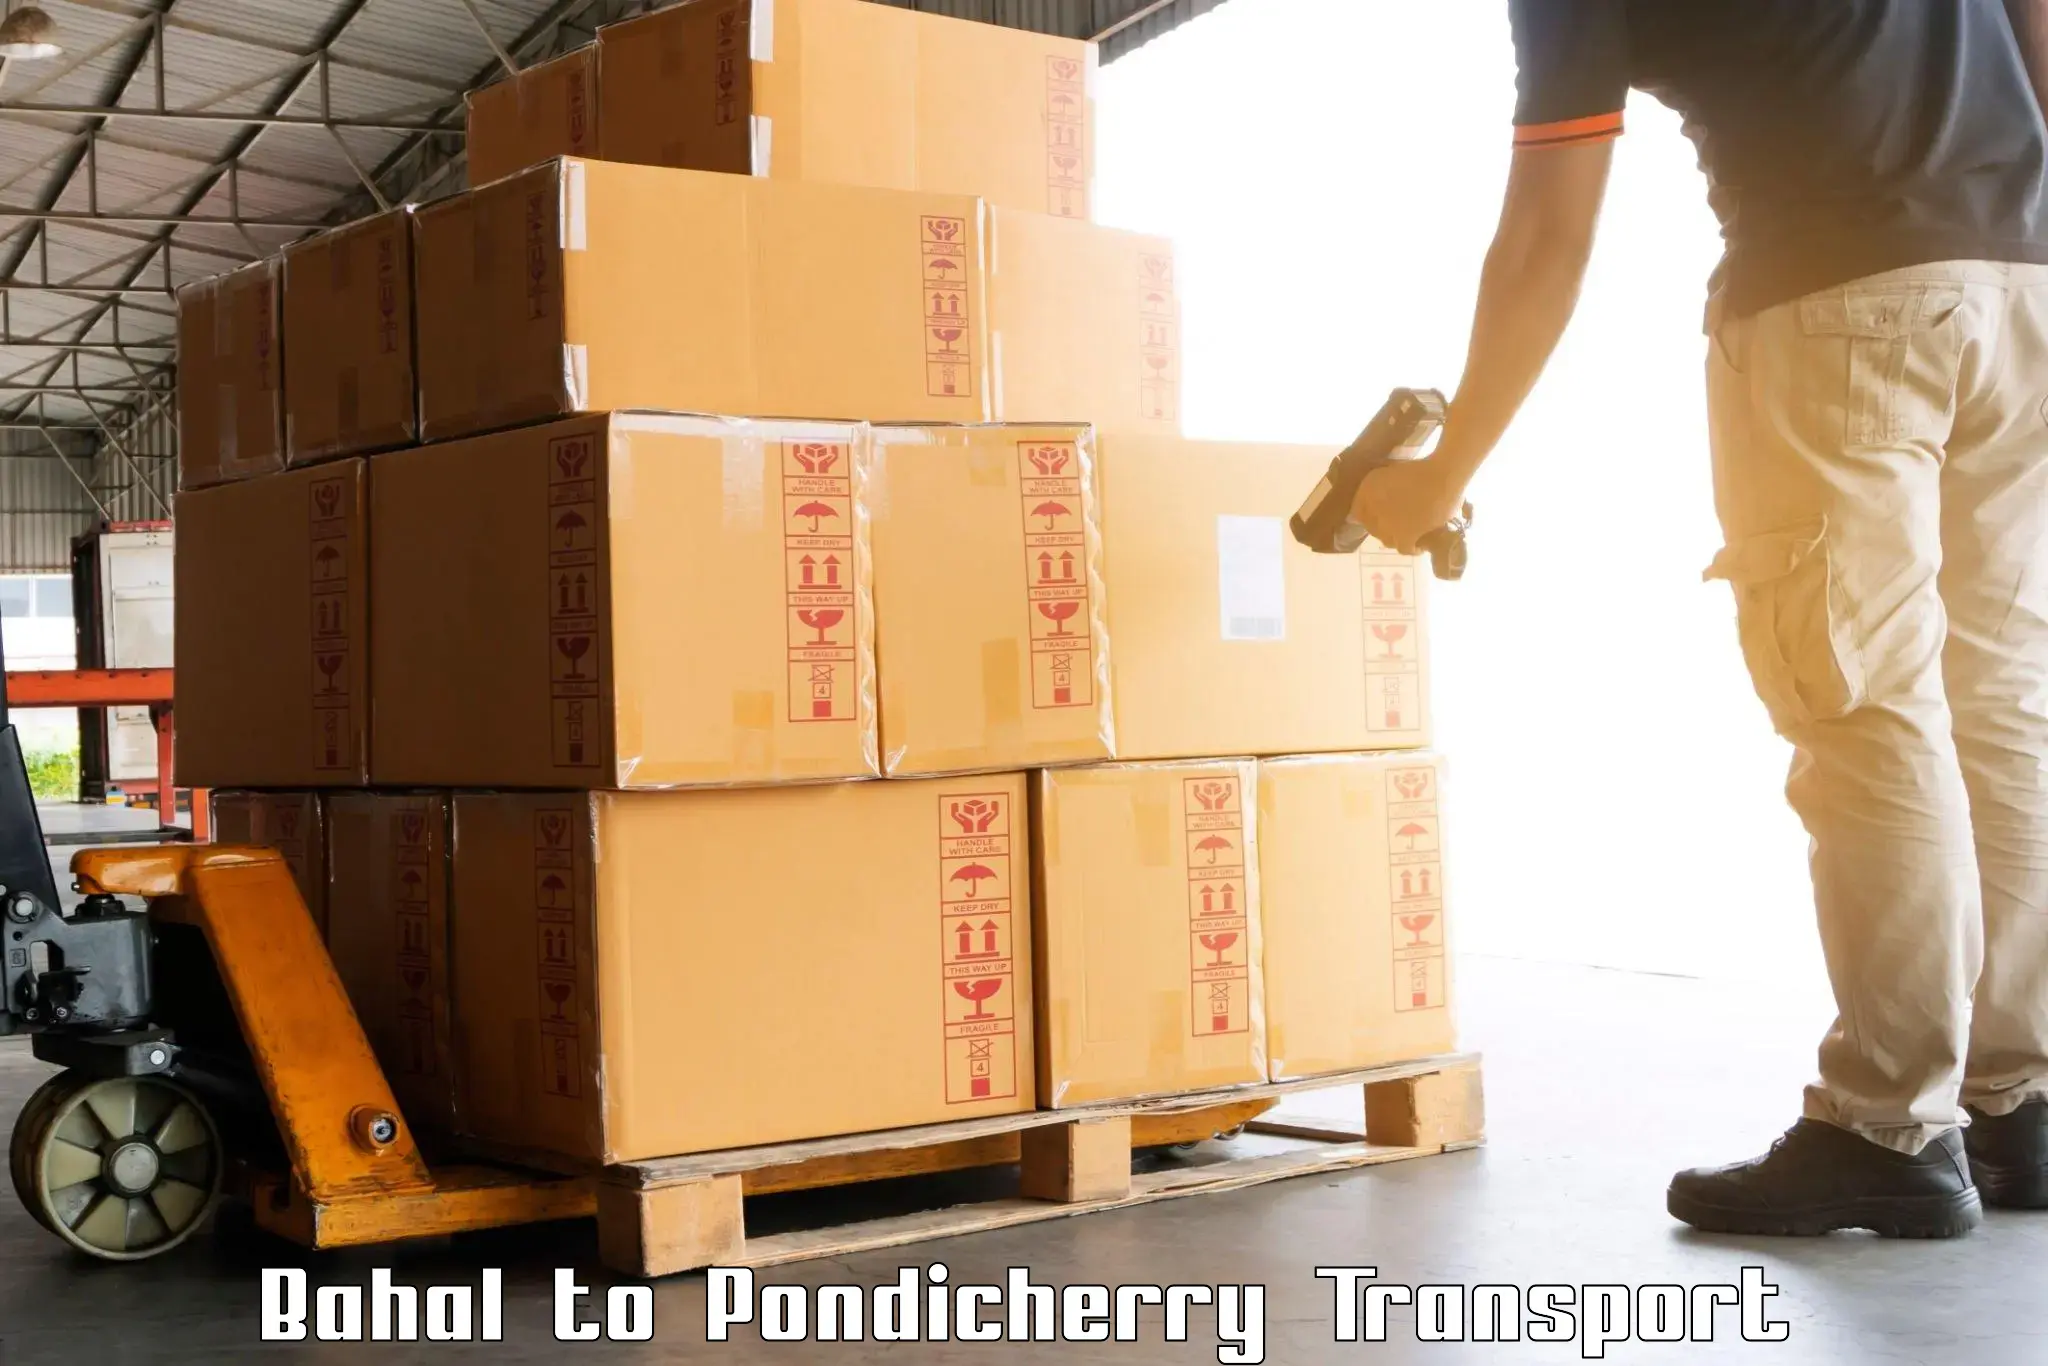 Goods delivery service Bahal to Pondicherry University